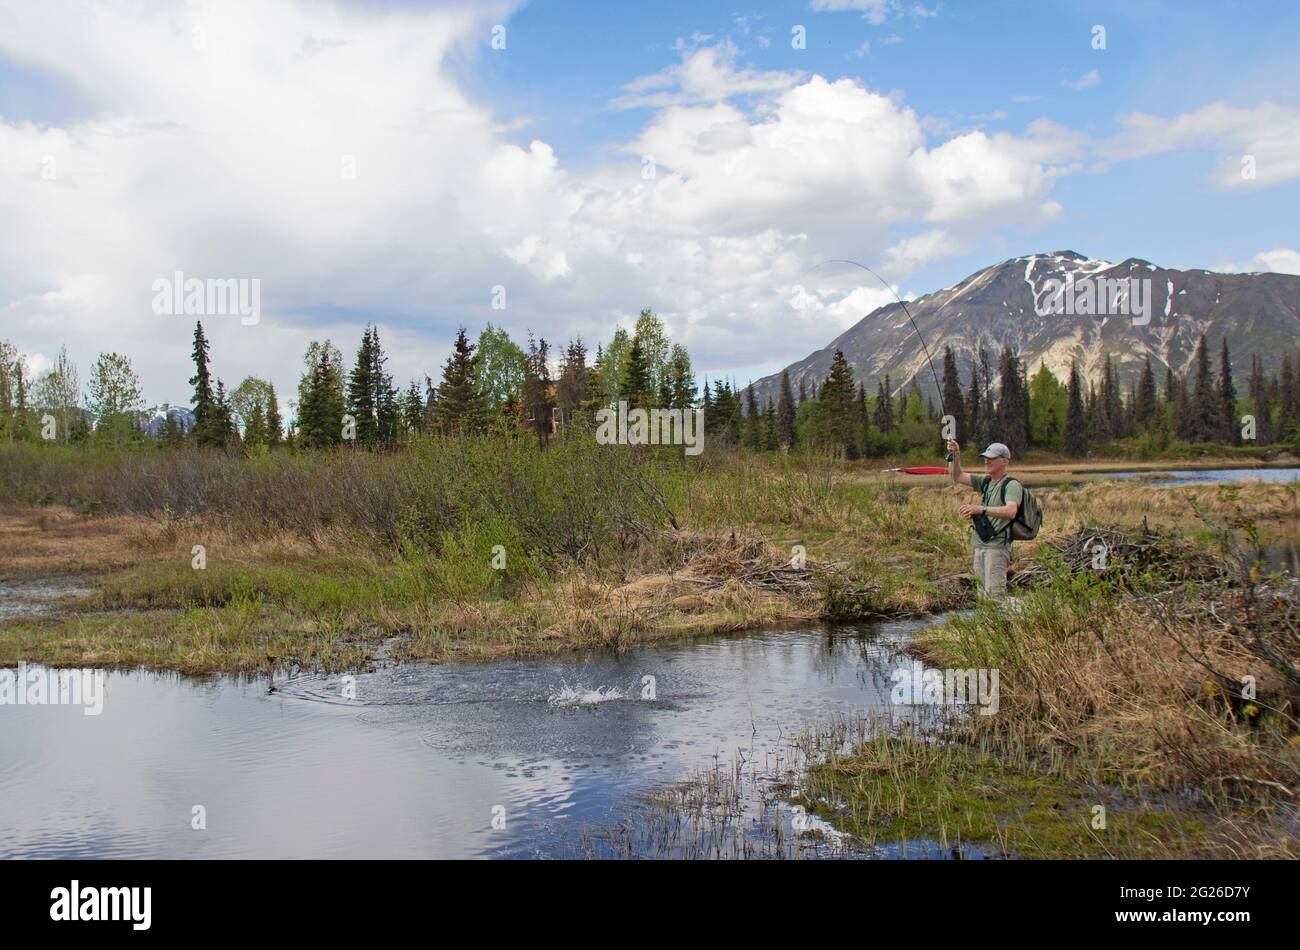 An anglers plays a wild rainbow trout in a remote wilderness setting in the Alaska Range. Stock Photo